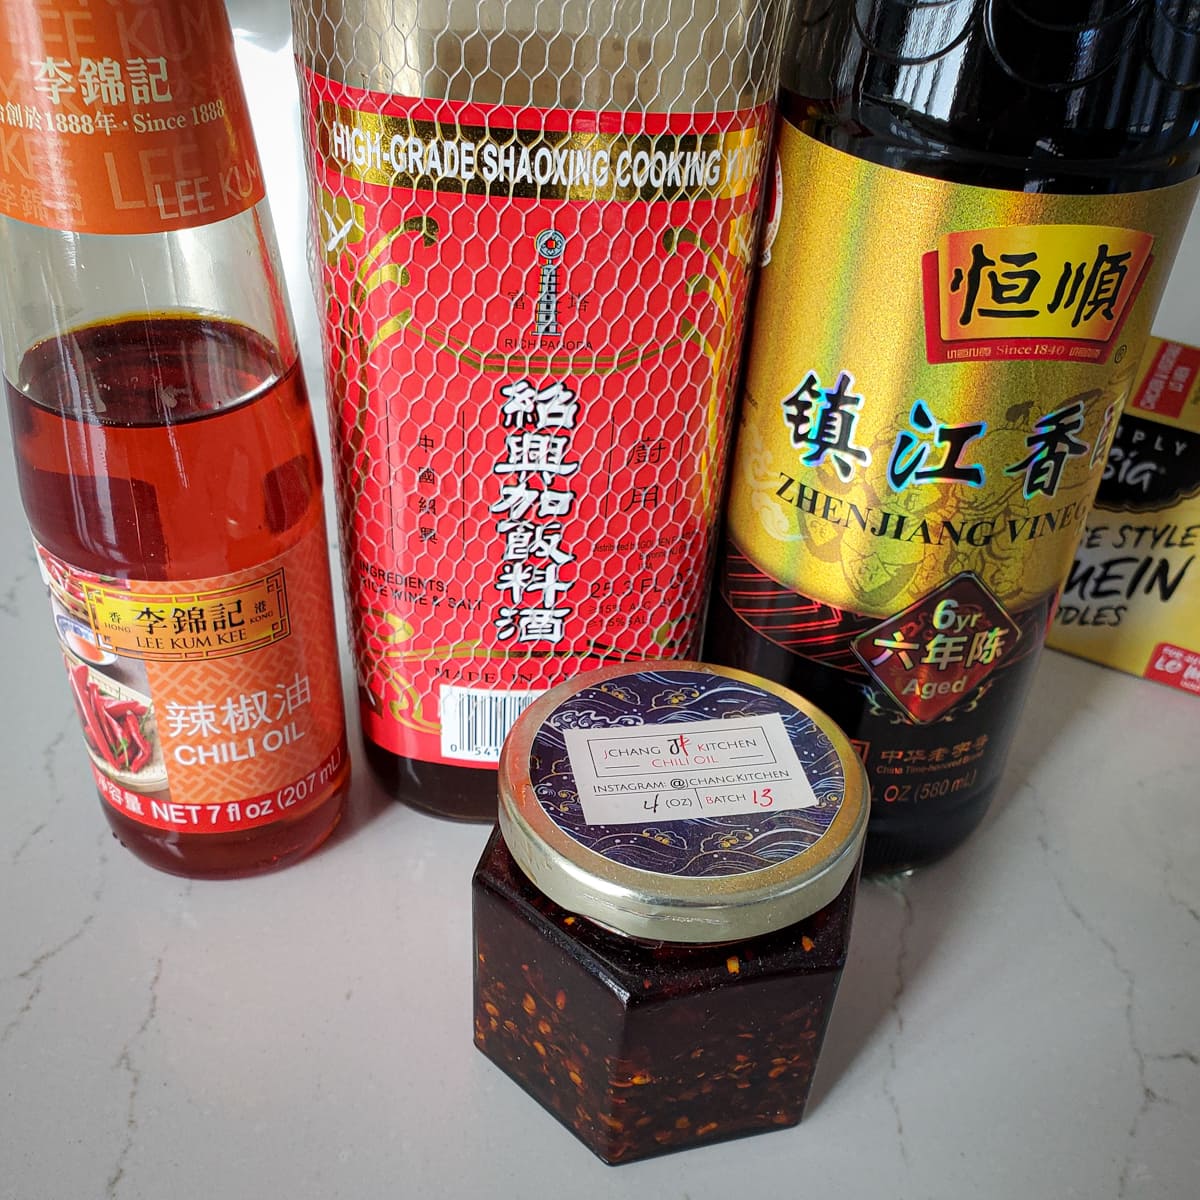 Chili oil, chili paste, Chinese vinegar, and Chinese cooking wine on a countertop.